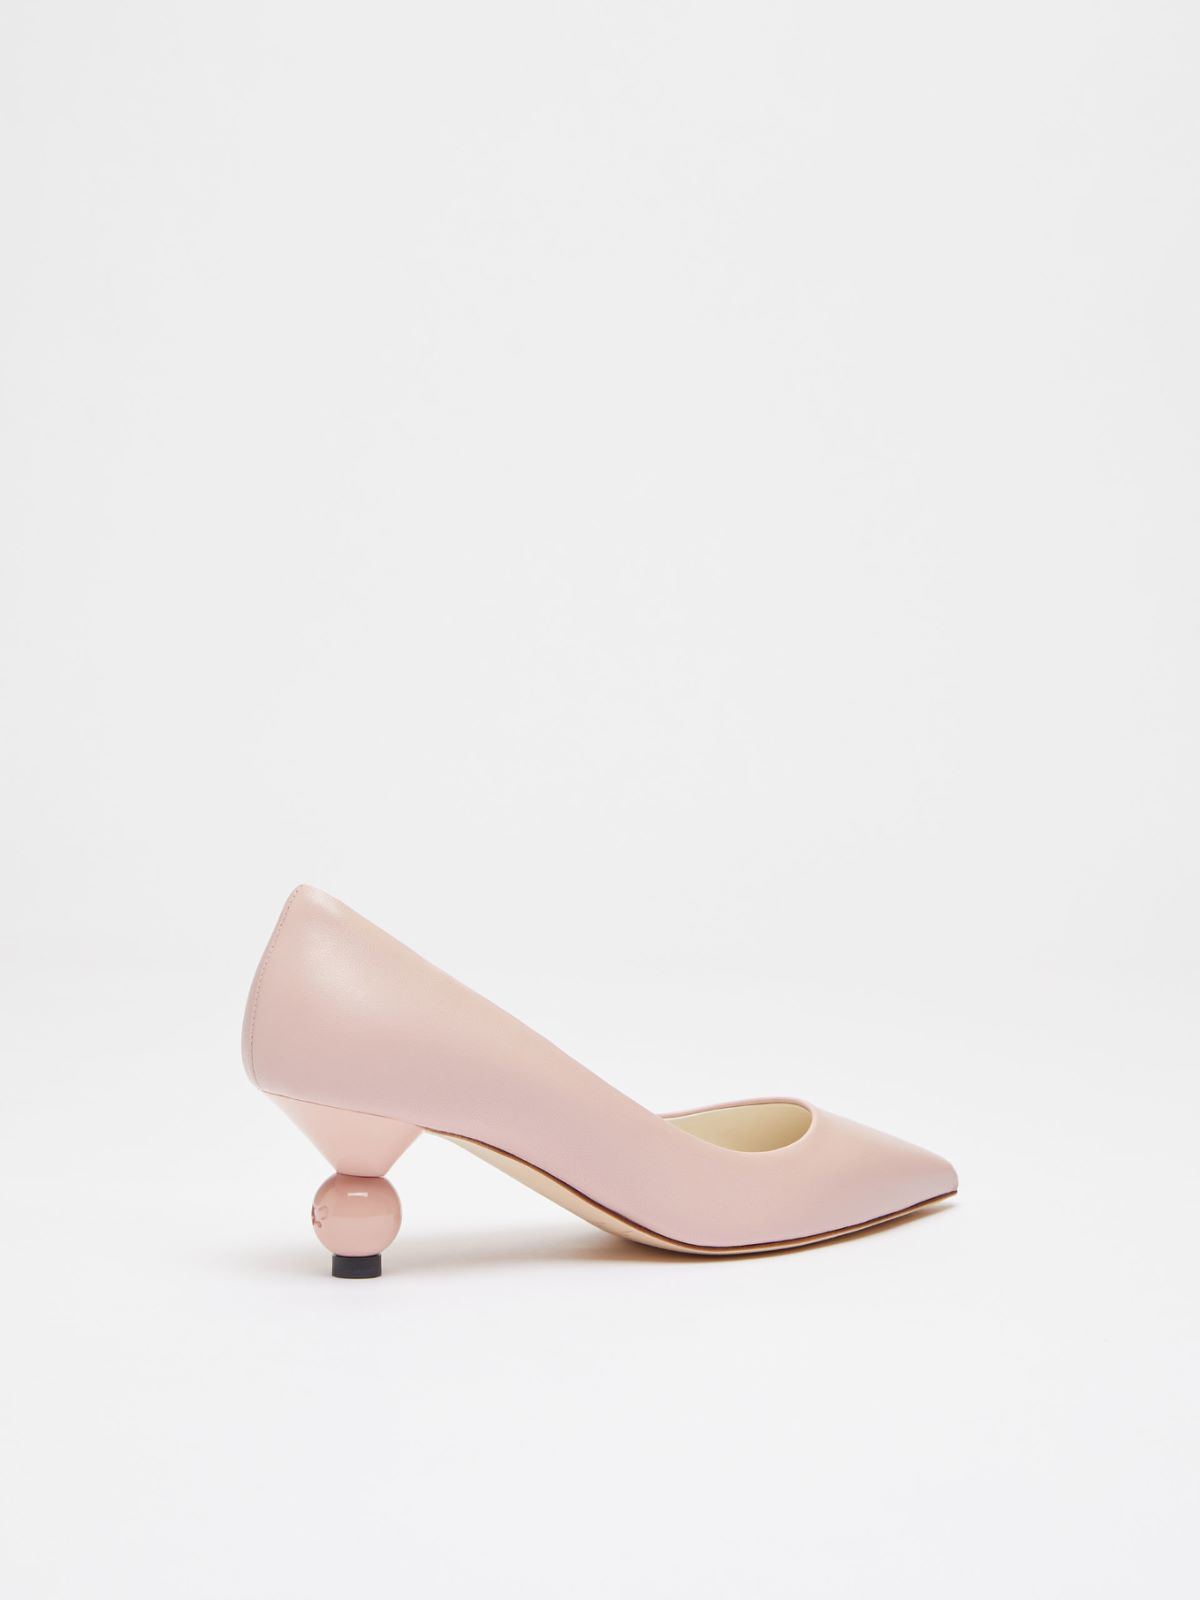 Nappa leather court shoes - ANTIQUE ROSE - Weekend Max Mara - 3